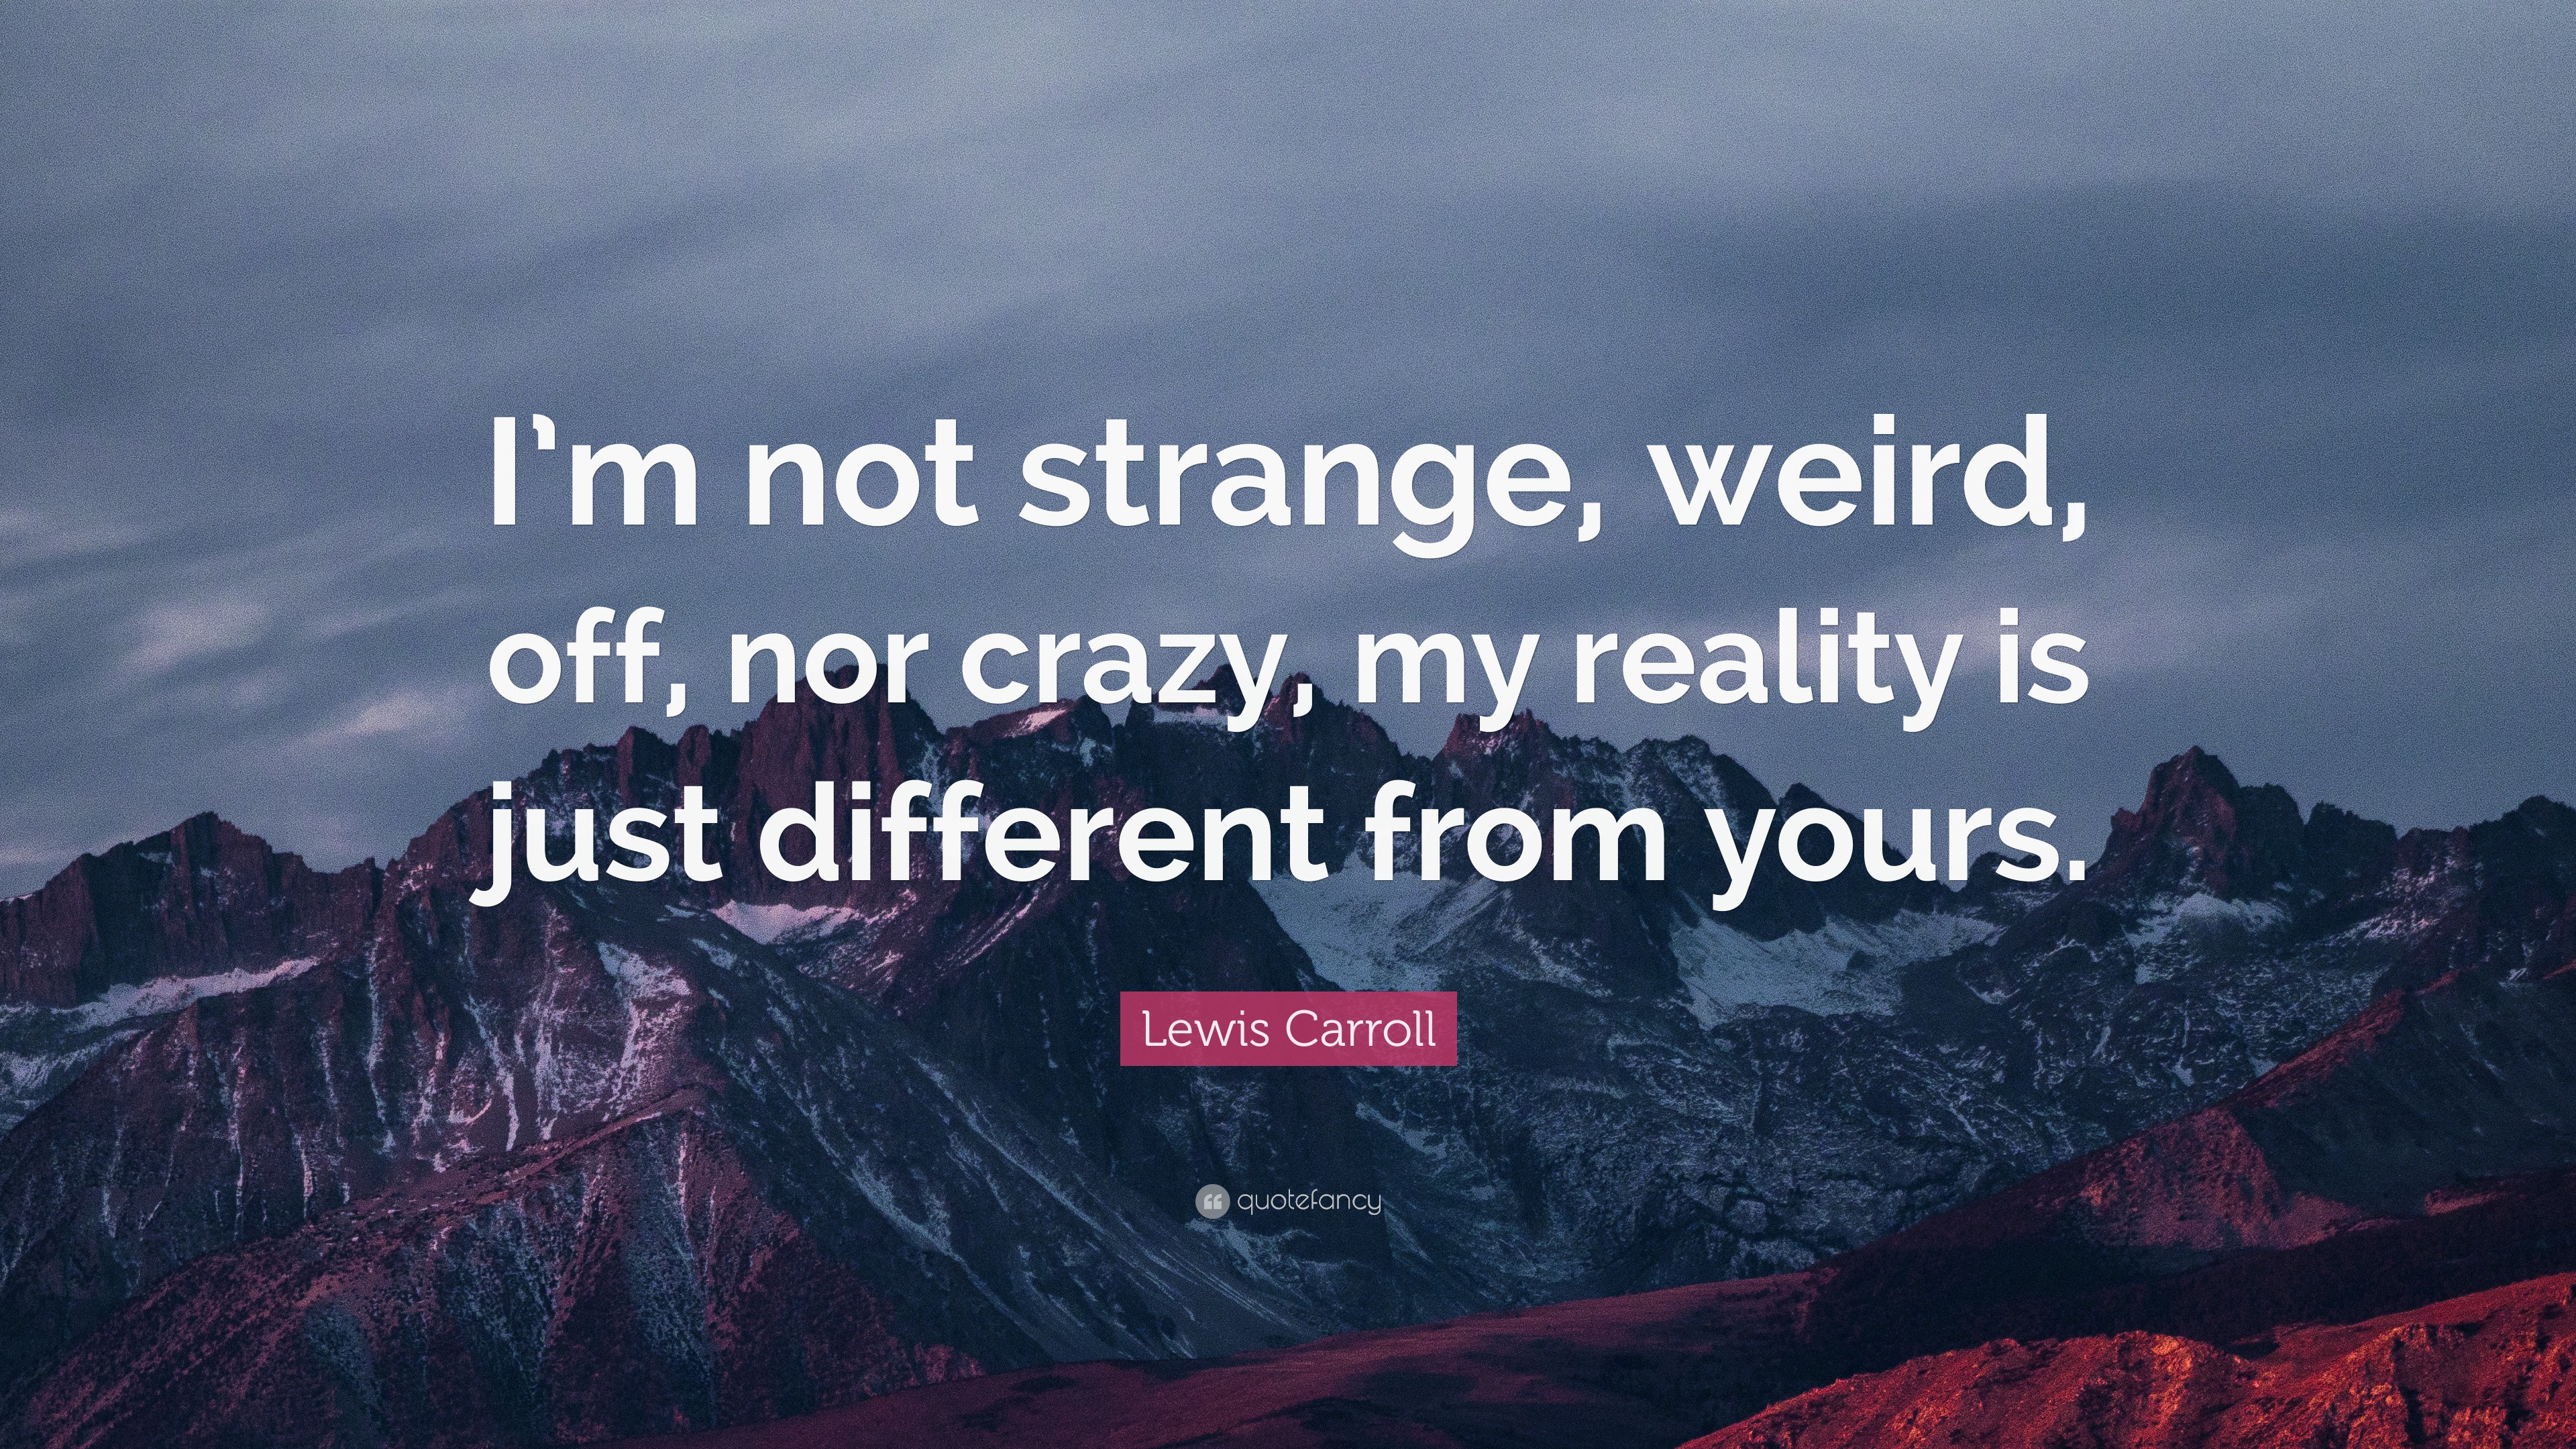 Lewis Carroll Quote: "I'm not strange, weird, off, nor ...